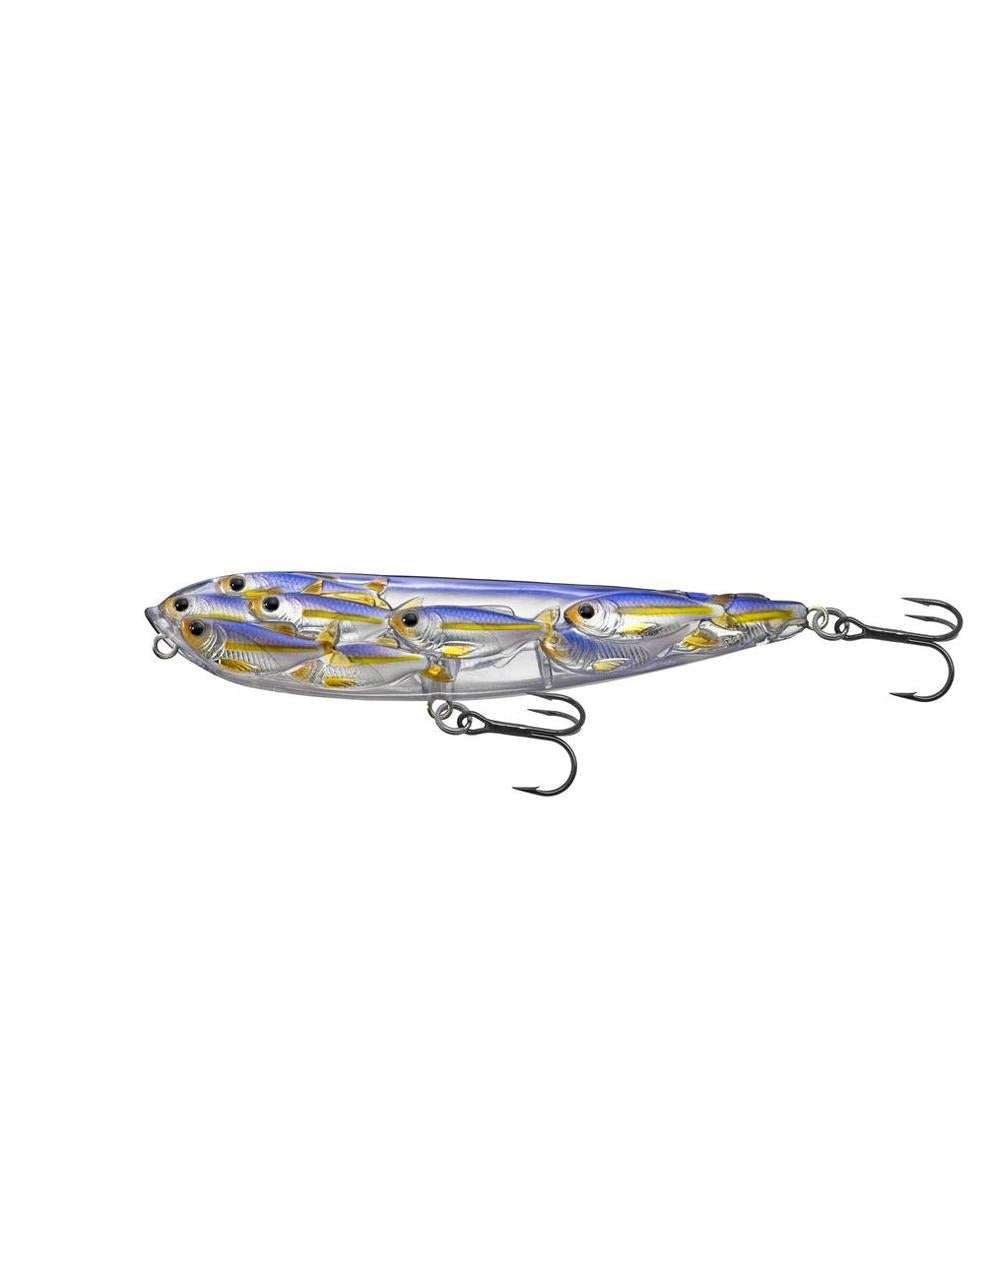 Live Target Bait Ball Yearling/Alevin Walking Bait